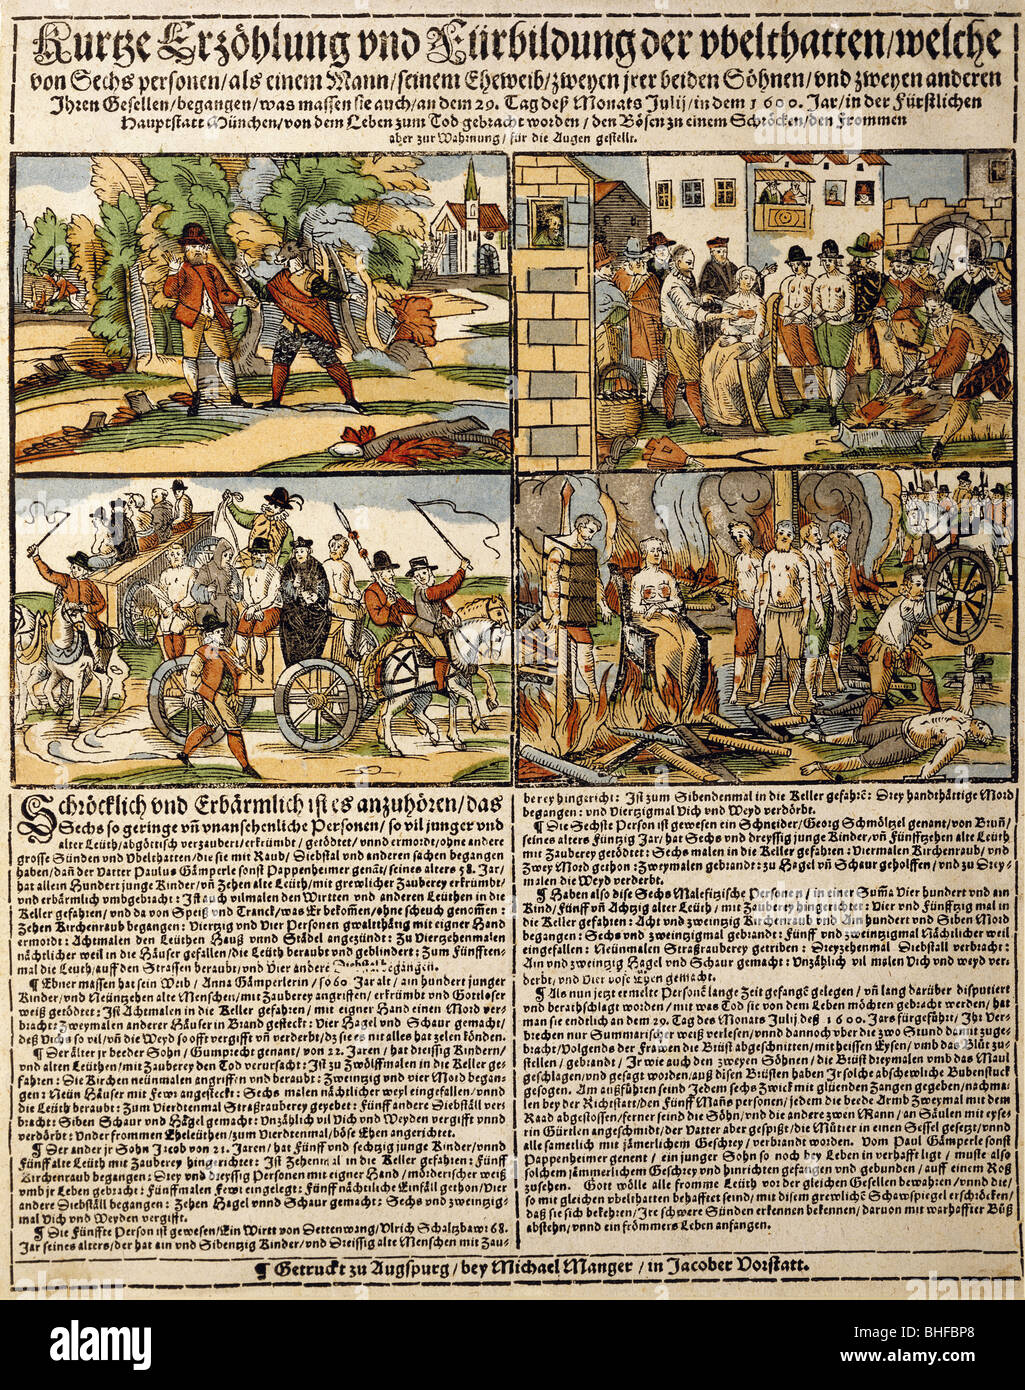 justice, penitentary system, execution, public torture and burning of the vagabond familiy Pappenheimer, Munich, 28.7.1600, woodcut, broadsheet by Michael Manger, Augsburg, 1600, private collection, punishment, fleaflet, news, newspaper, media, press, Bavaria, Germany, 17th century, historic, historical, people, Stock Photo